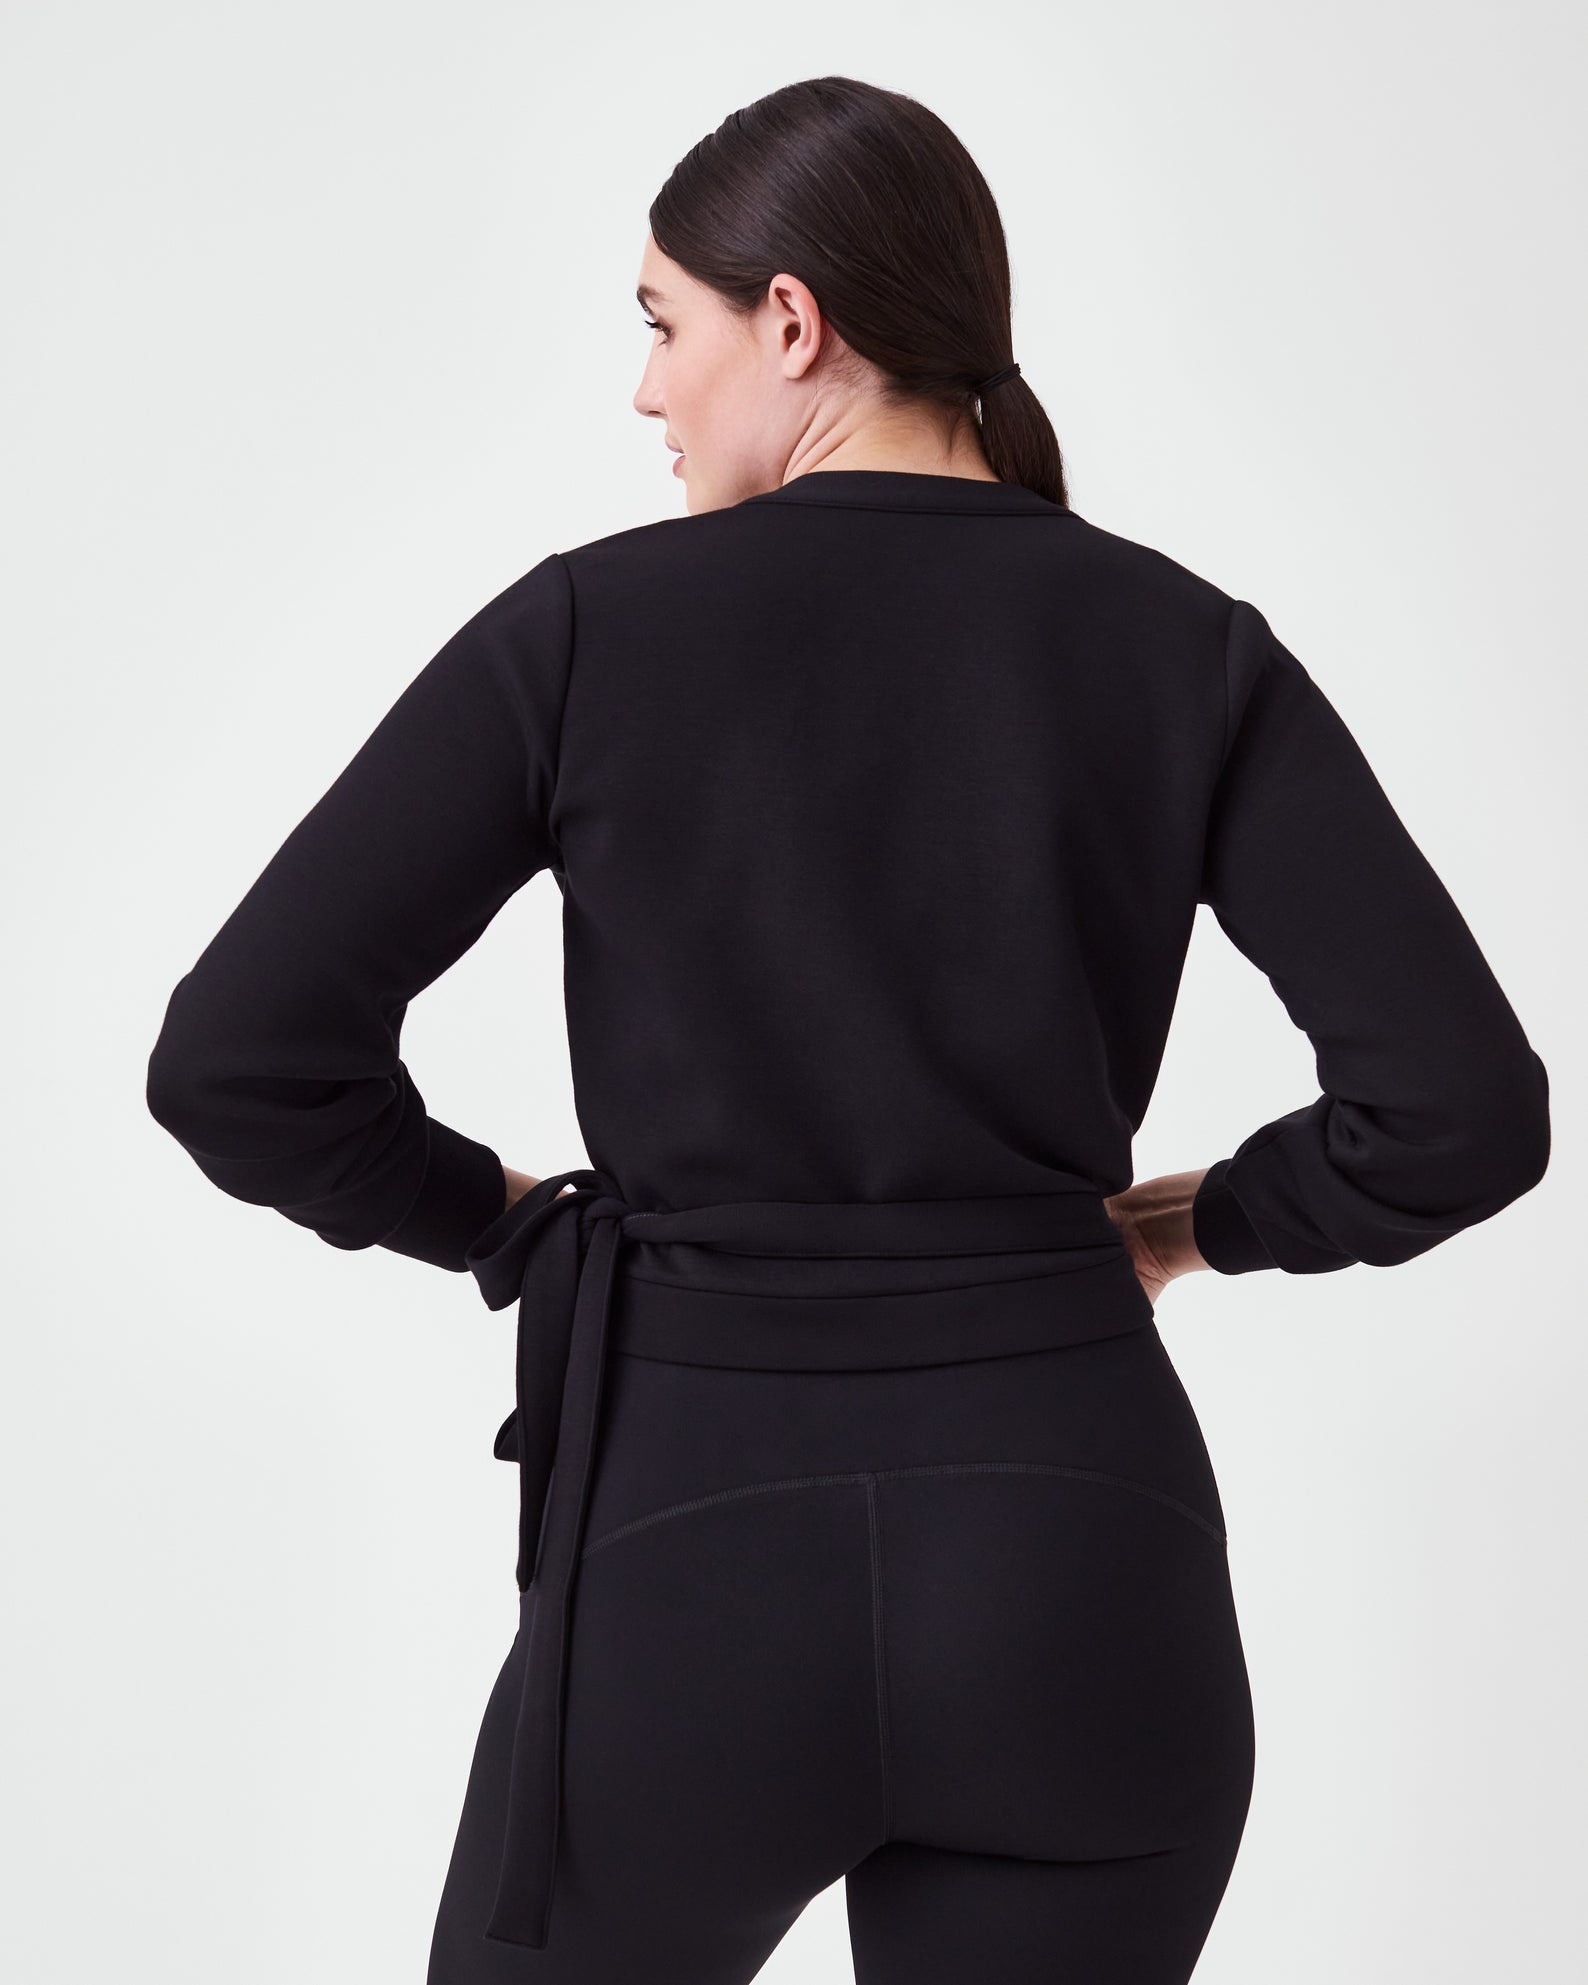 Spanx's New Ballet Wrap Is the Perfect Transitional Piece for Fall